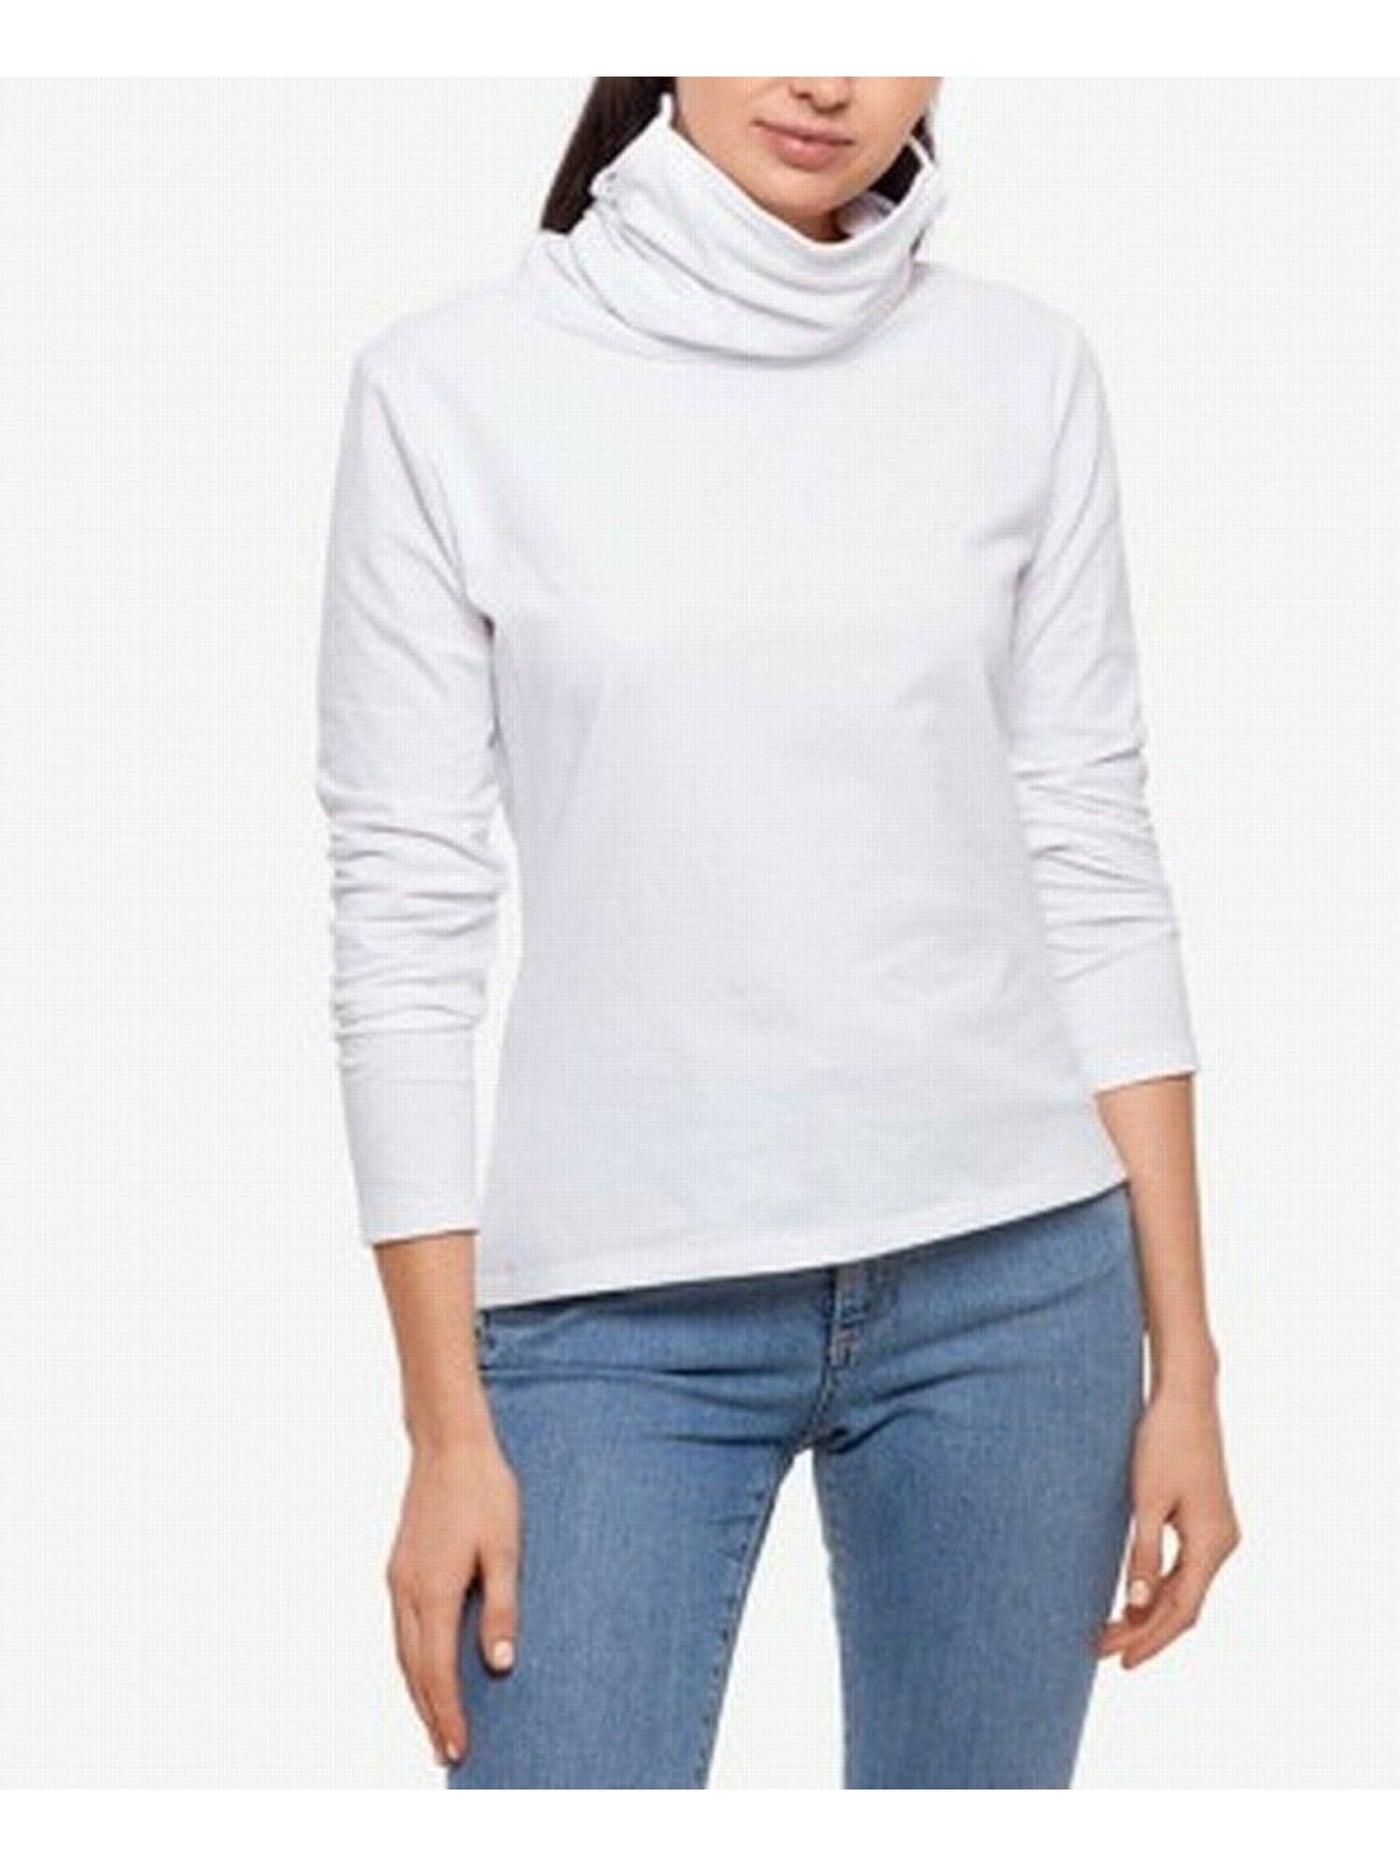 BAM BY BETSY & ADAM Womens Cotton Blend Long Sleeve Turtle Neck Top